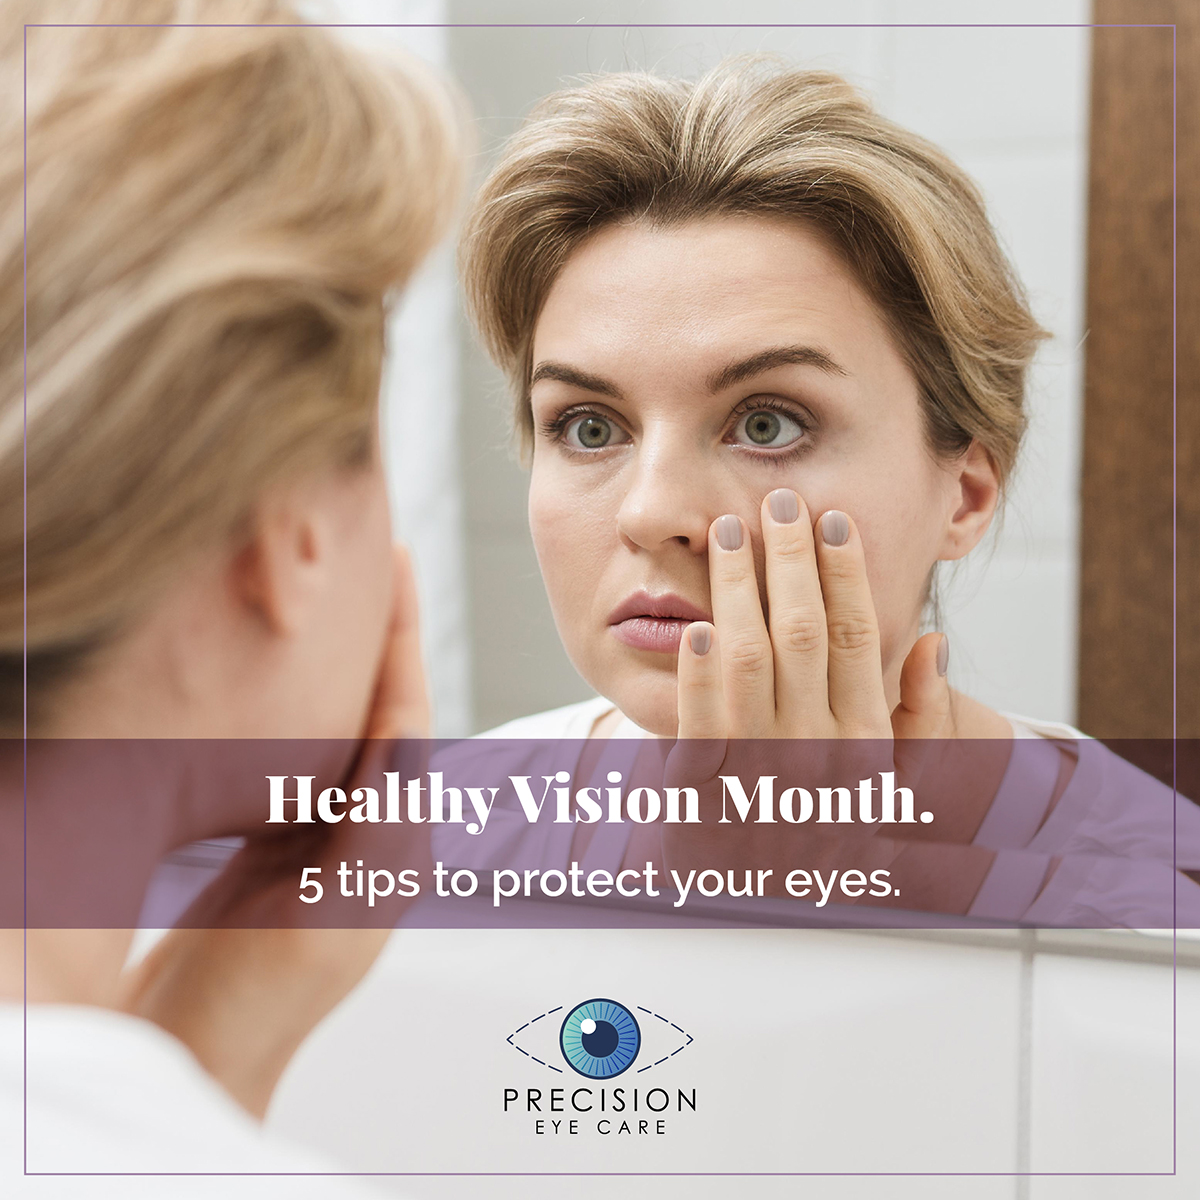 Healthy Vision Month. 5 tips to protect your eyes.